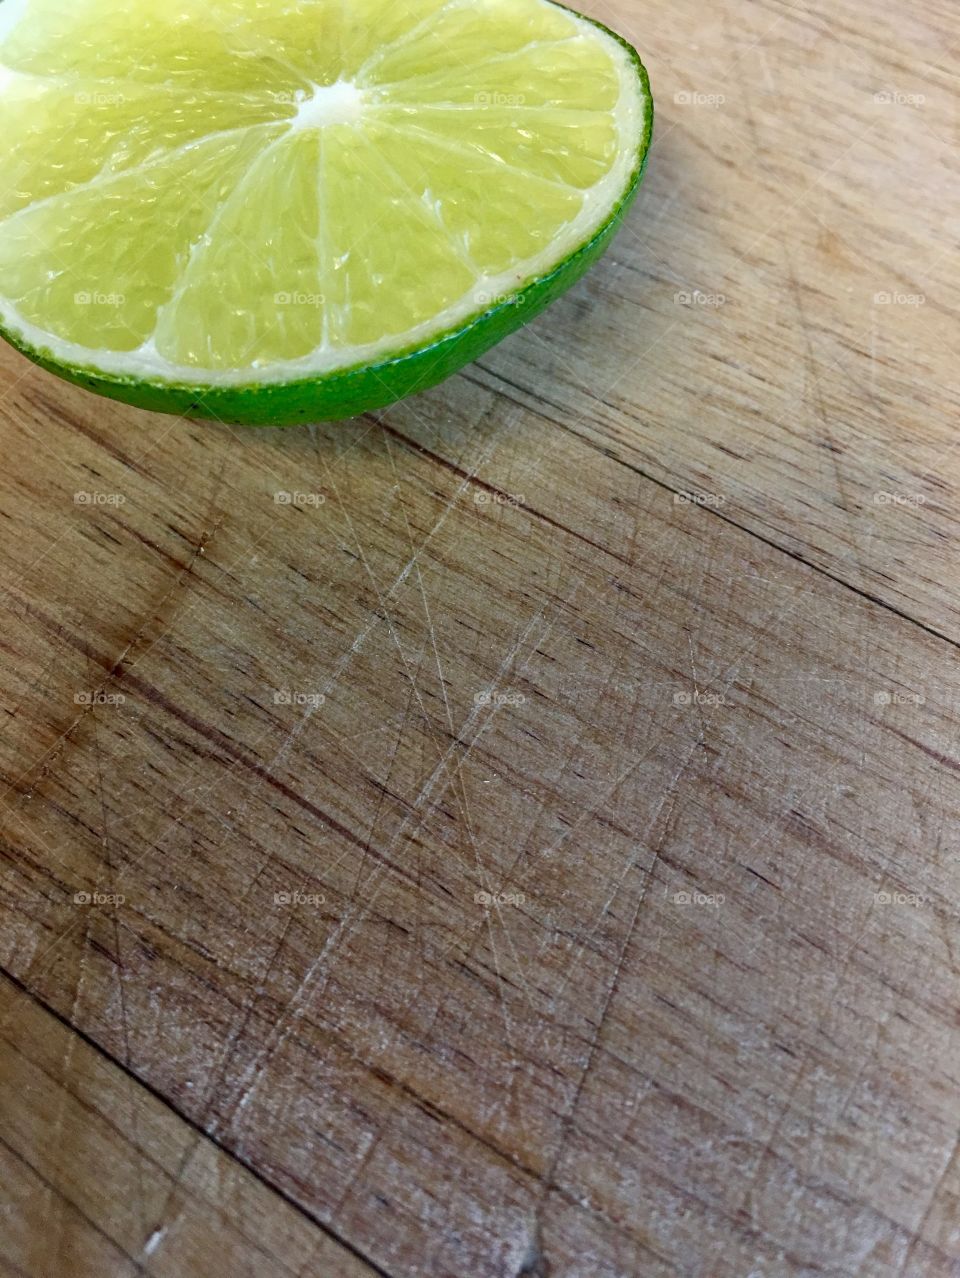 Lime close up on cutting board 